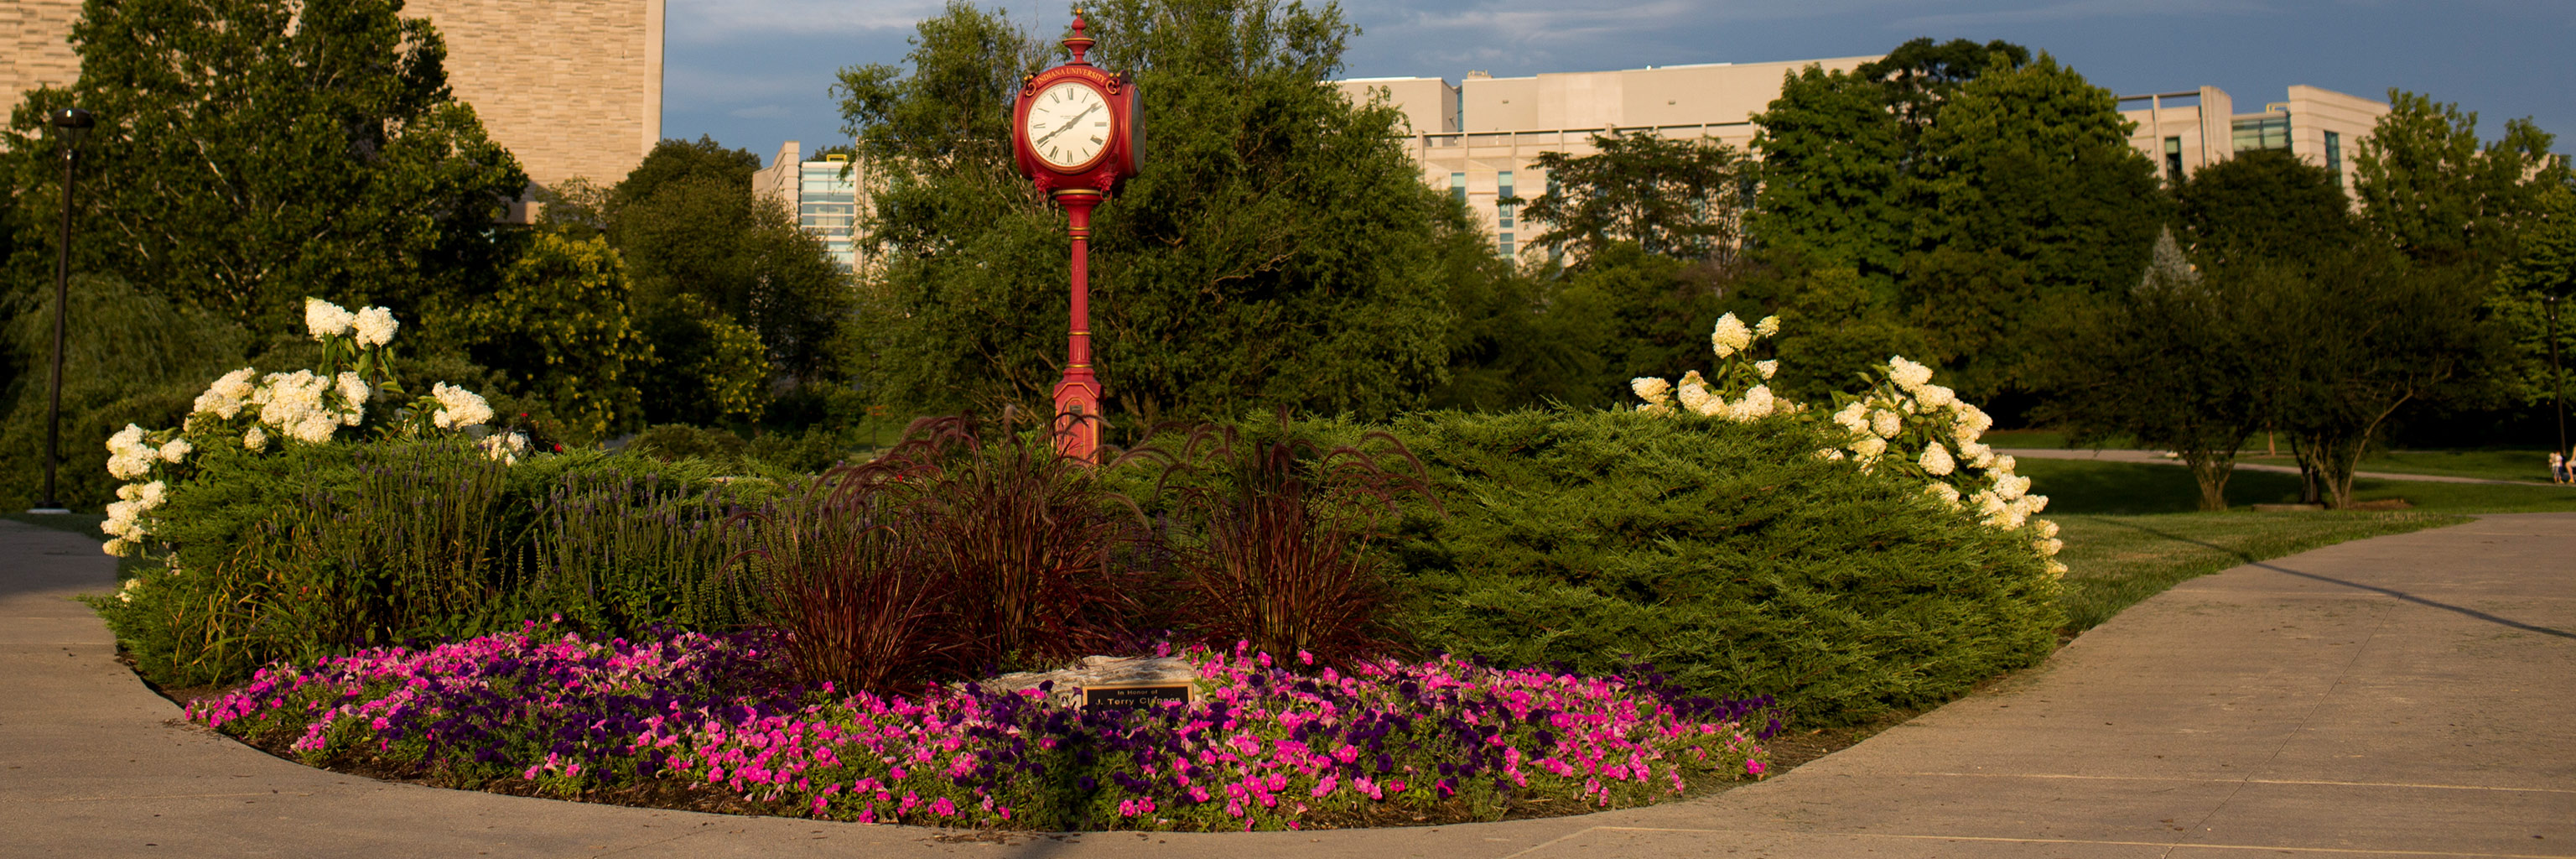 Flowers and trees next to red ornamental clock